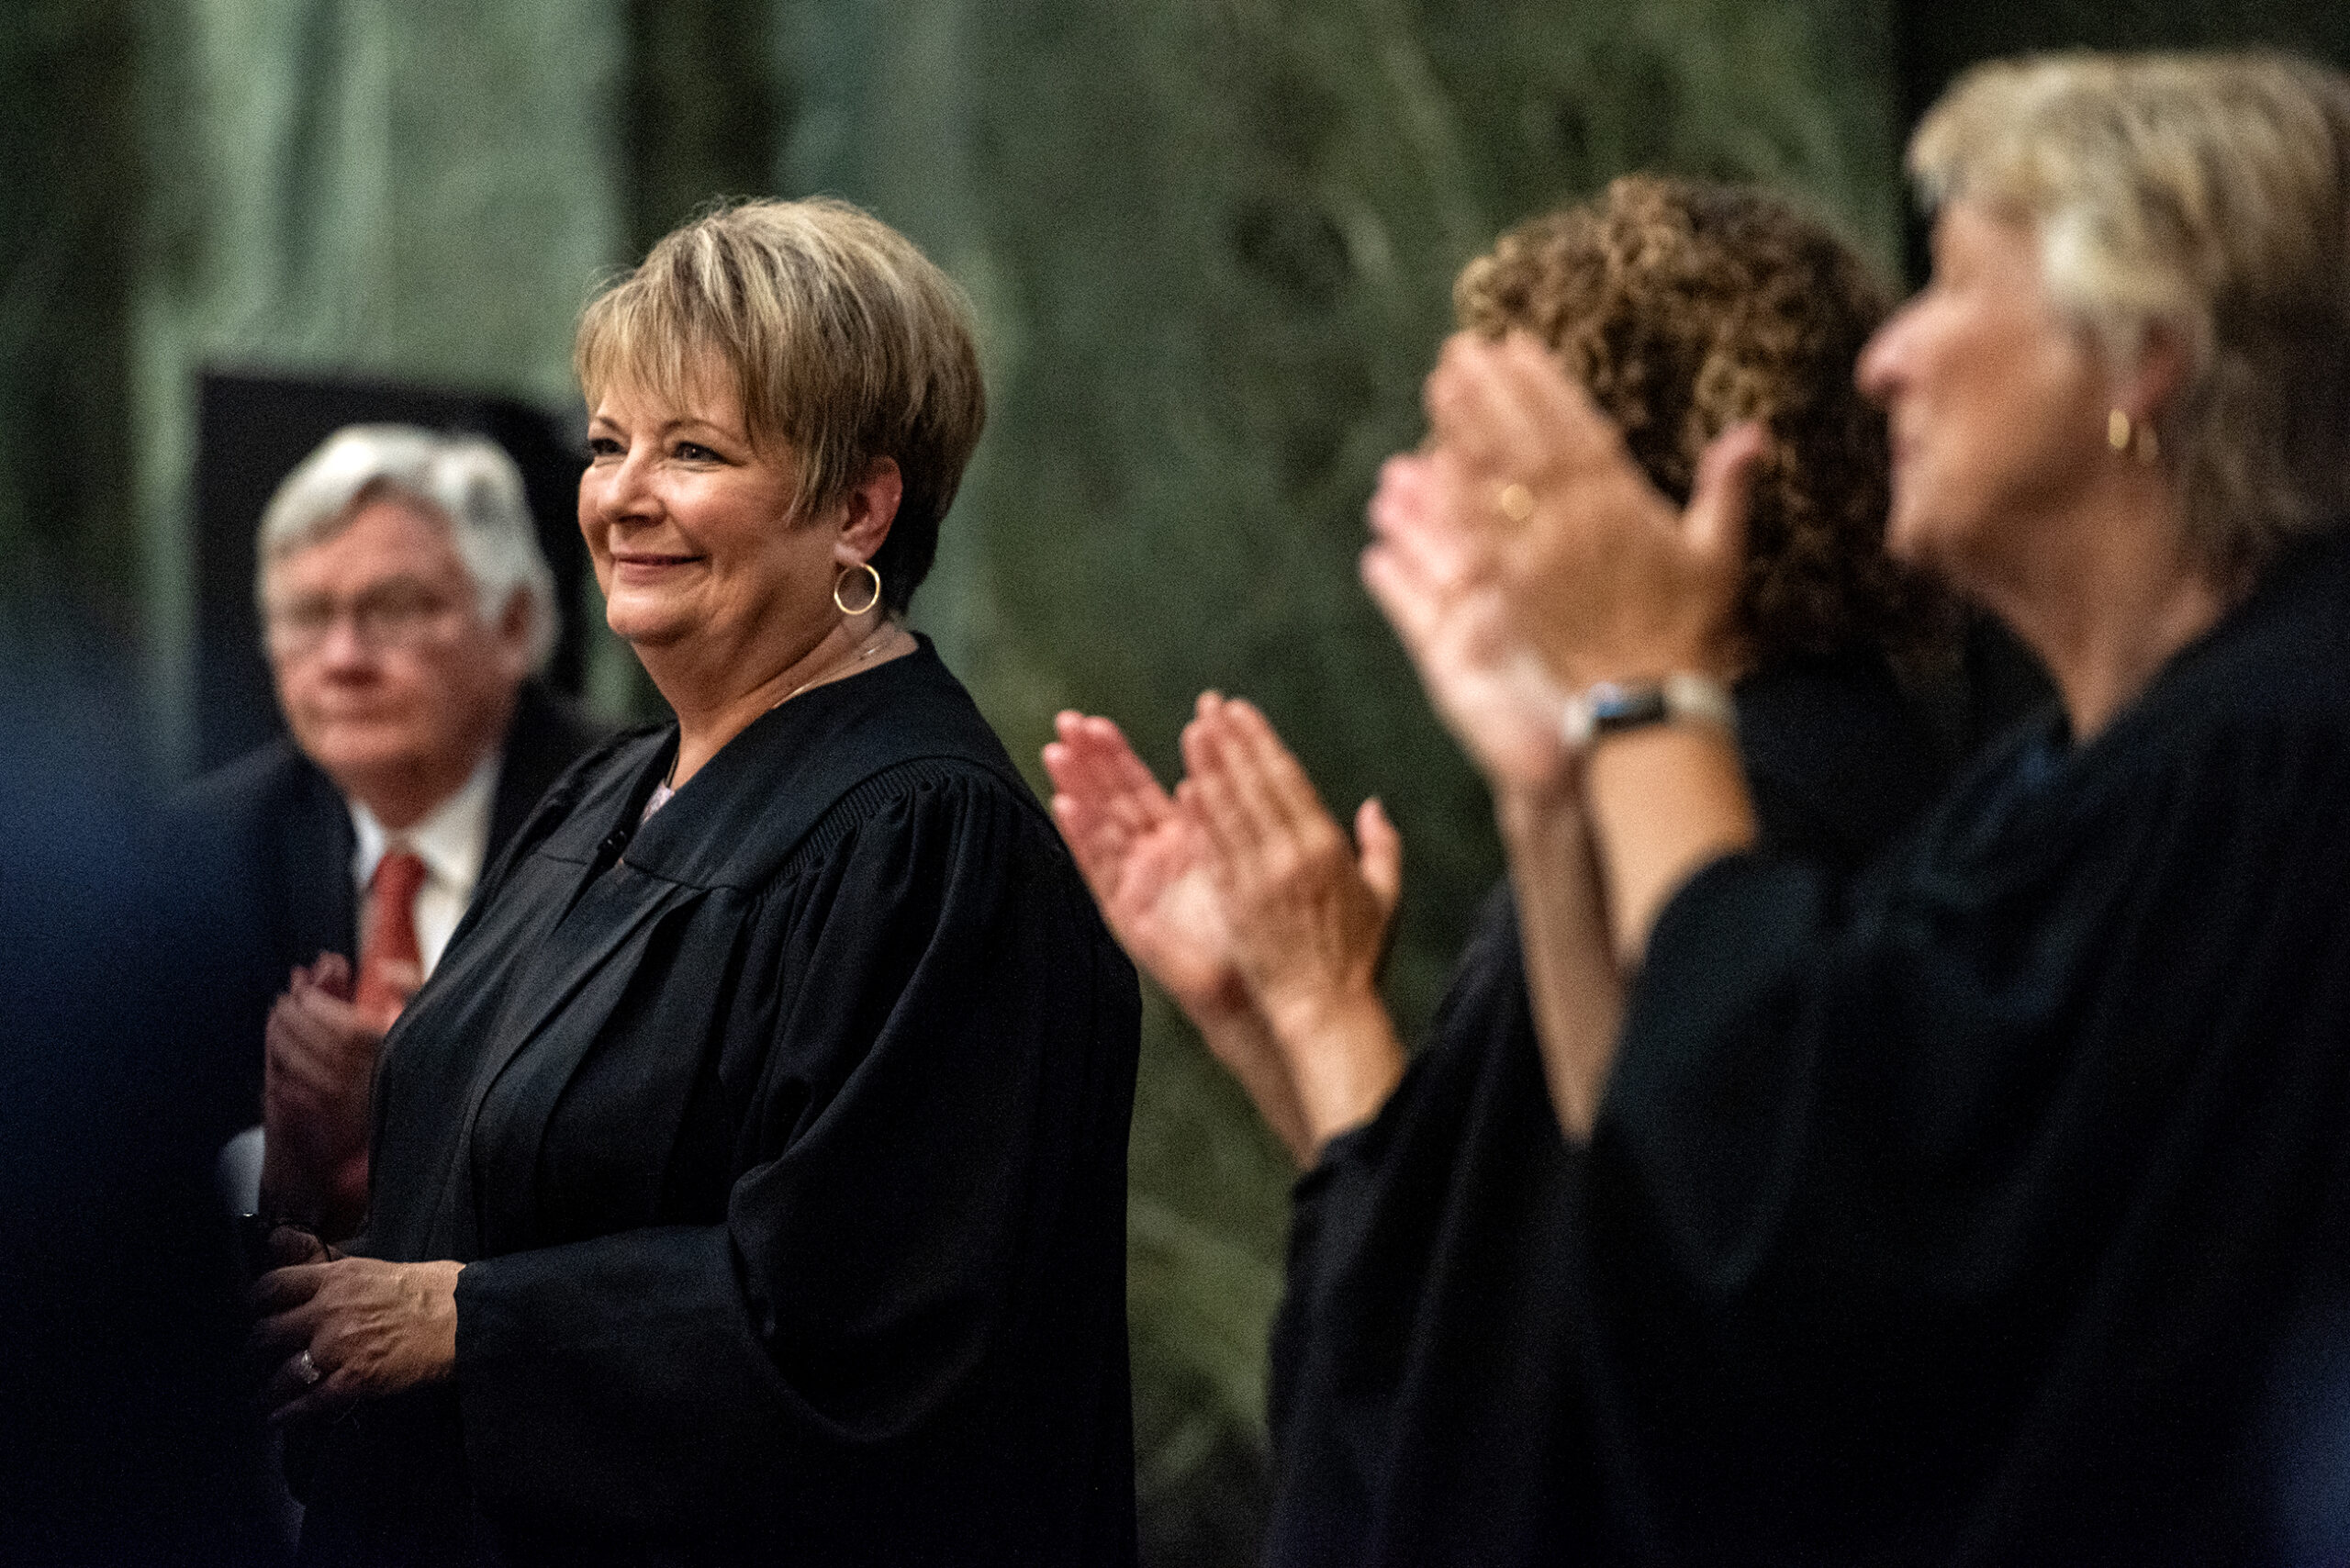 Janet Protasiewicz smiles at the podium as other justices applaud behind her.